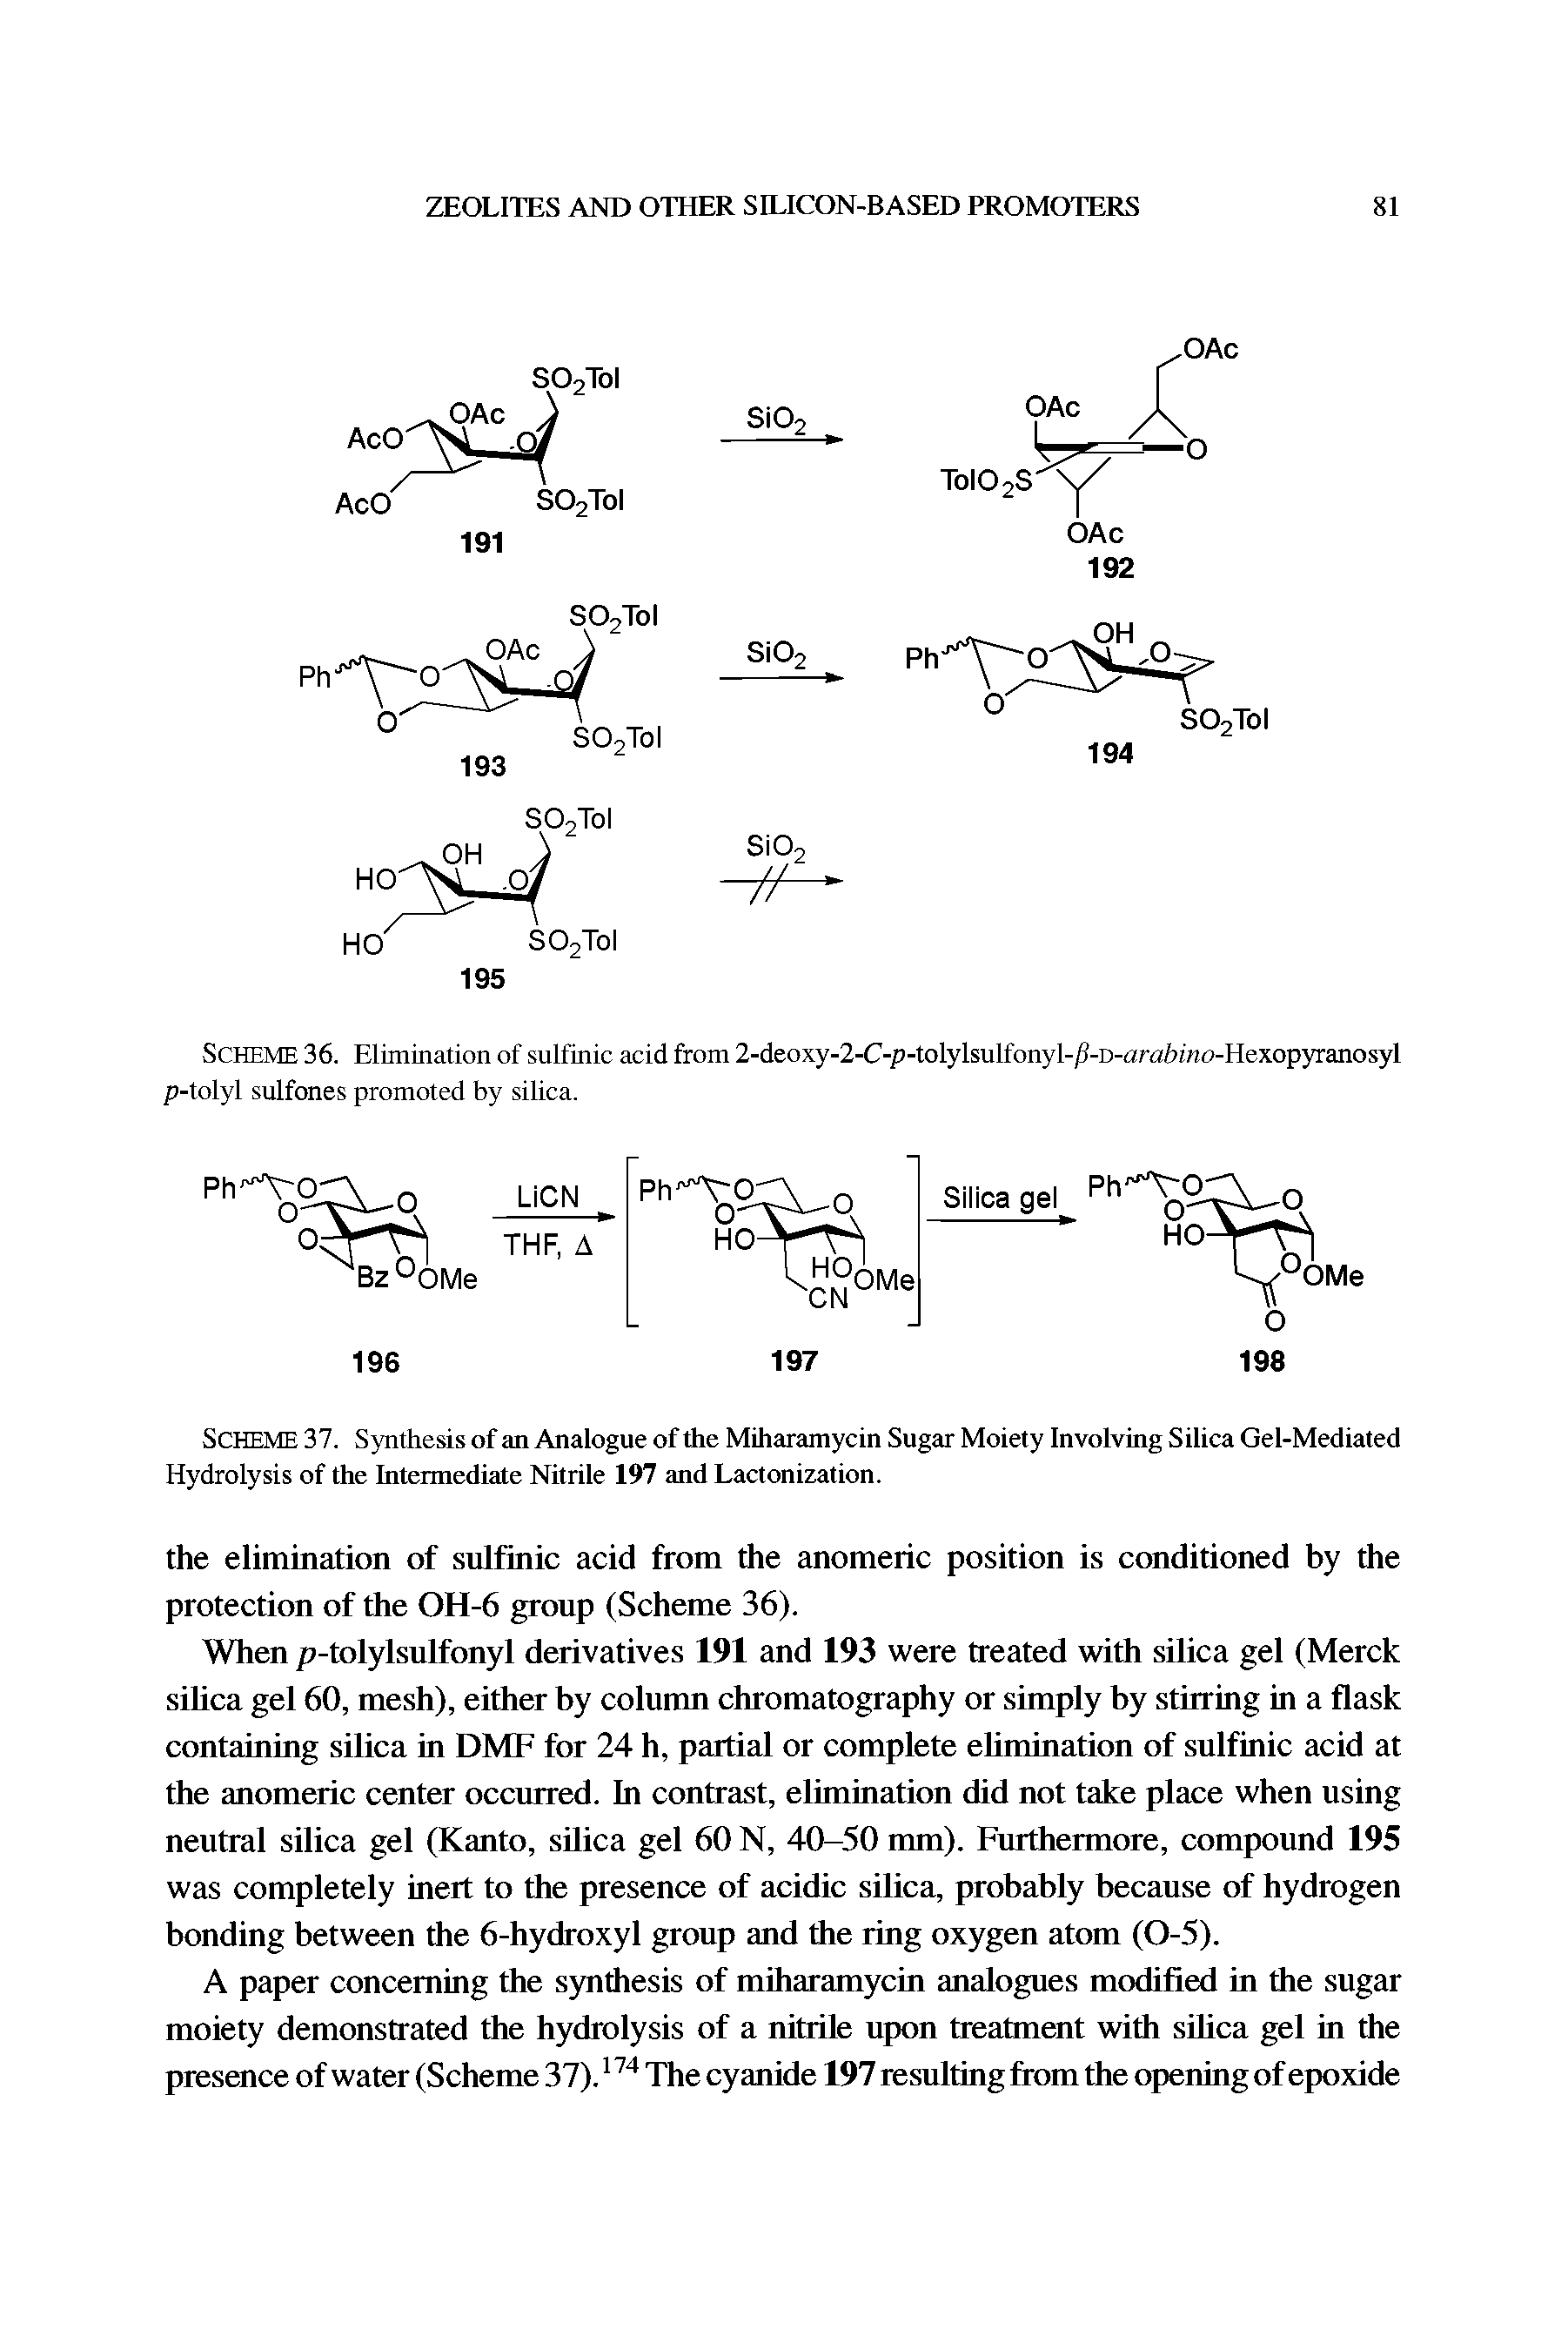 Scheme 36. Elimination of sulfinic acid from 2-deoxy-2-C-p-tolylsulfonyl-/i-D-ara moHexopyranosyl p-tolyl sulfones promoted by silica.